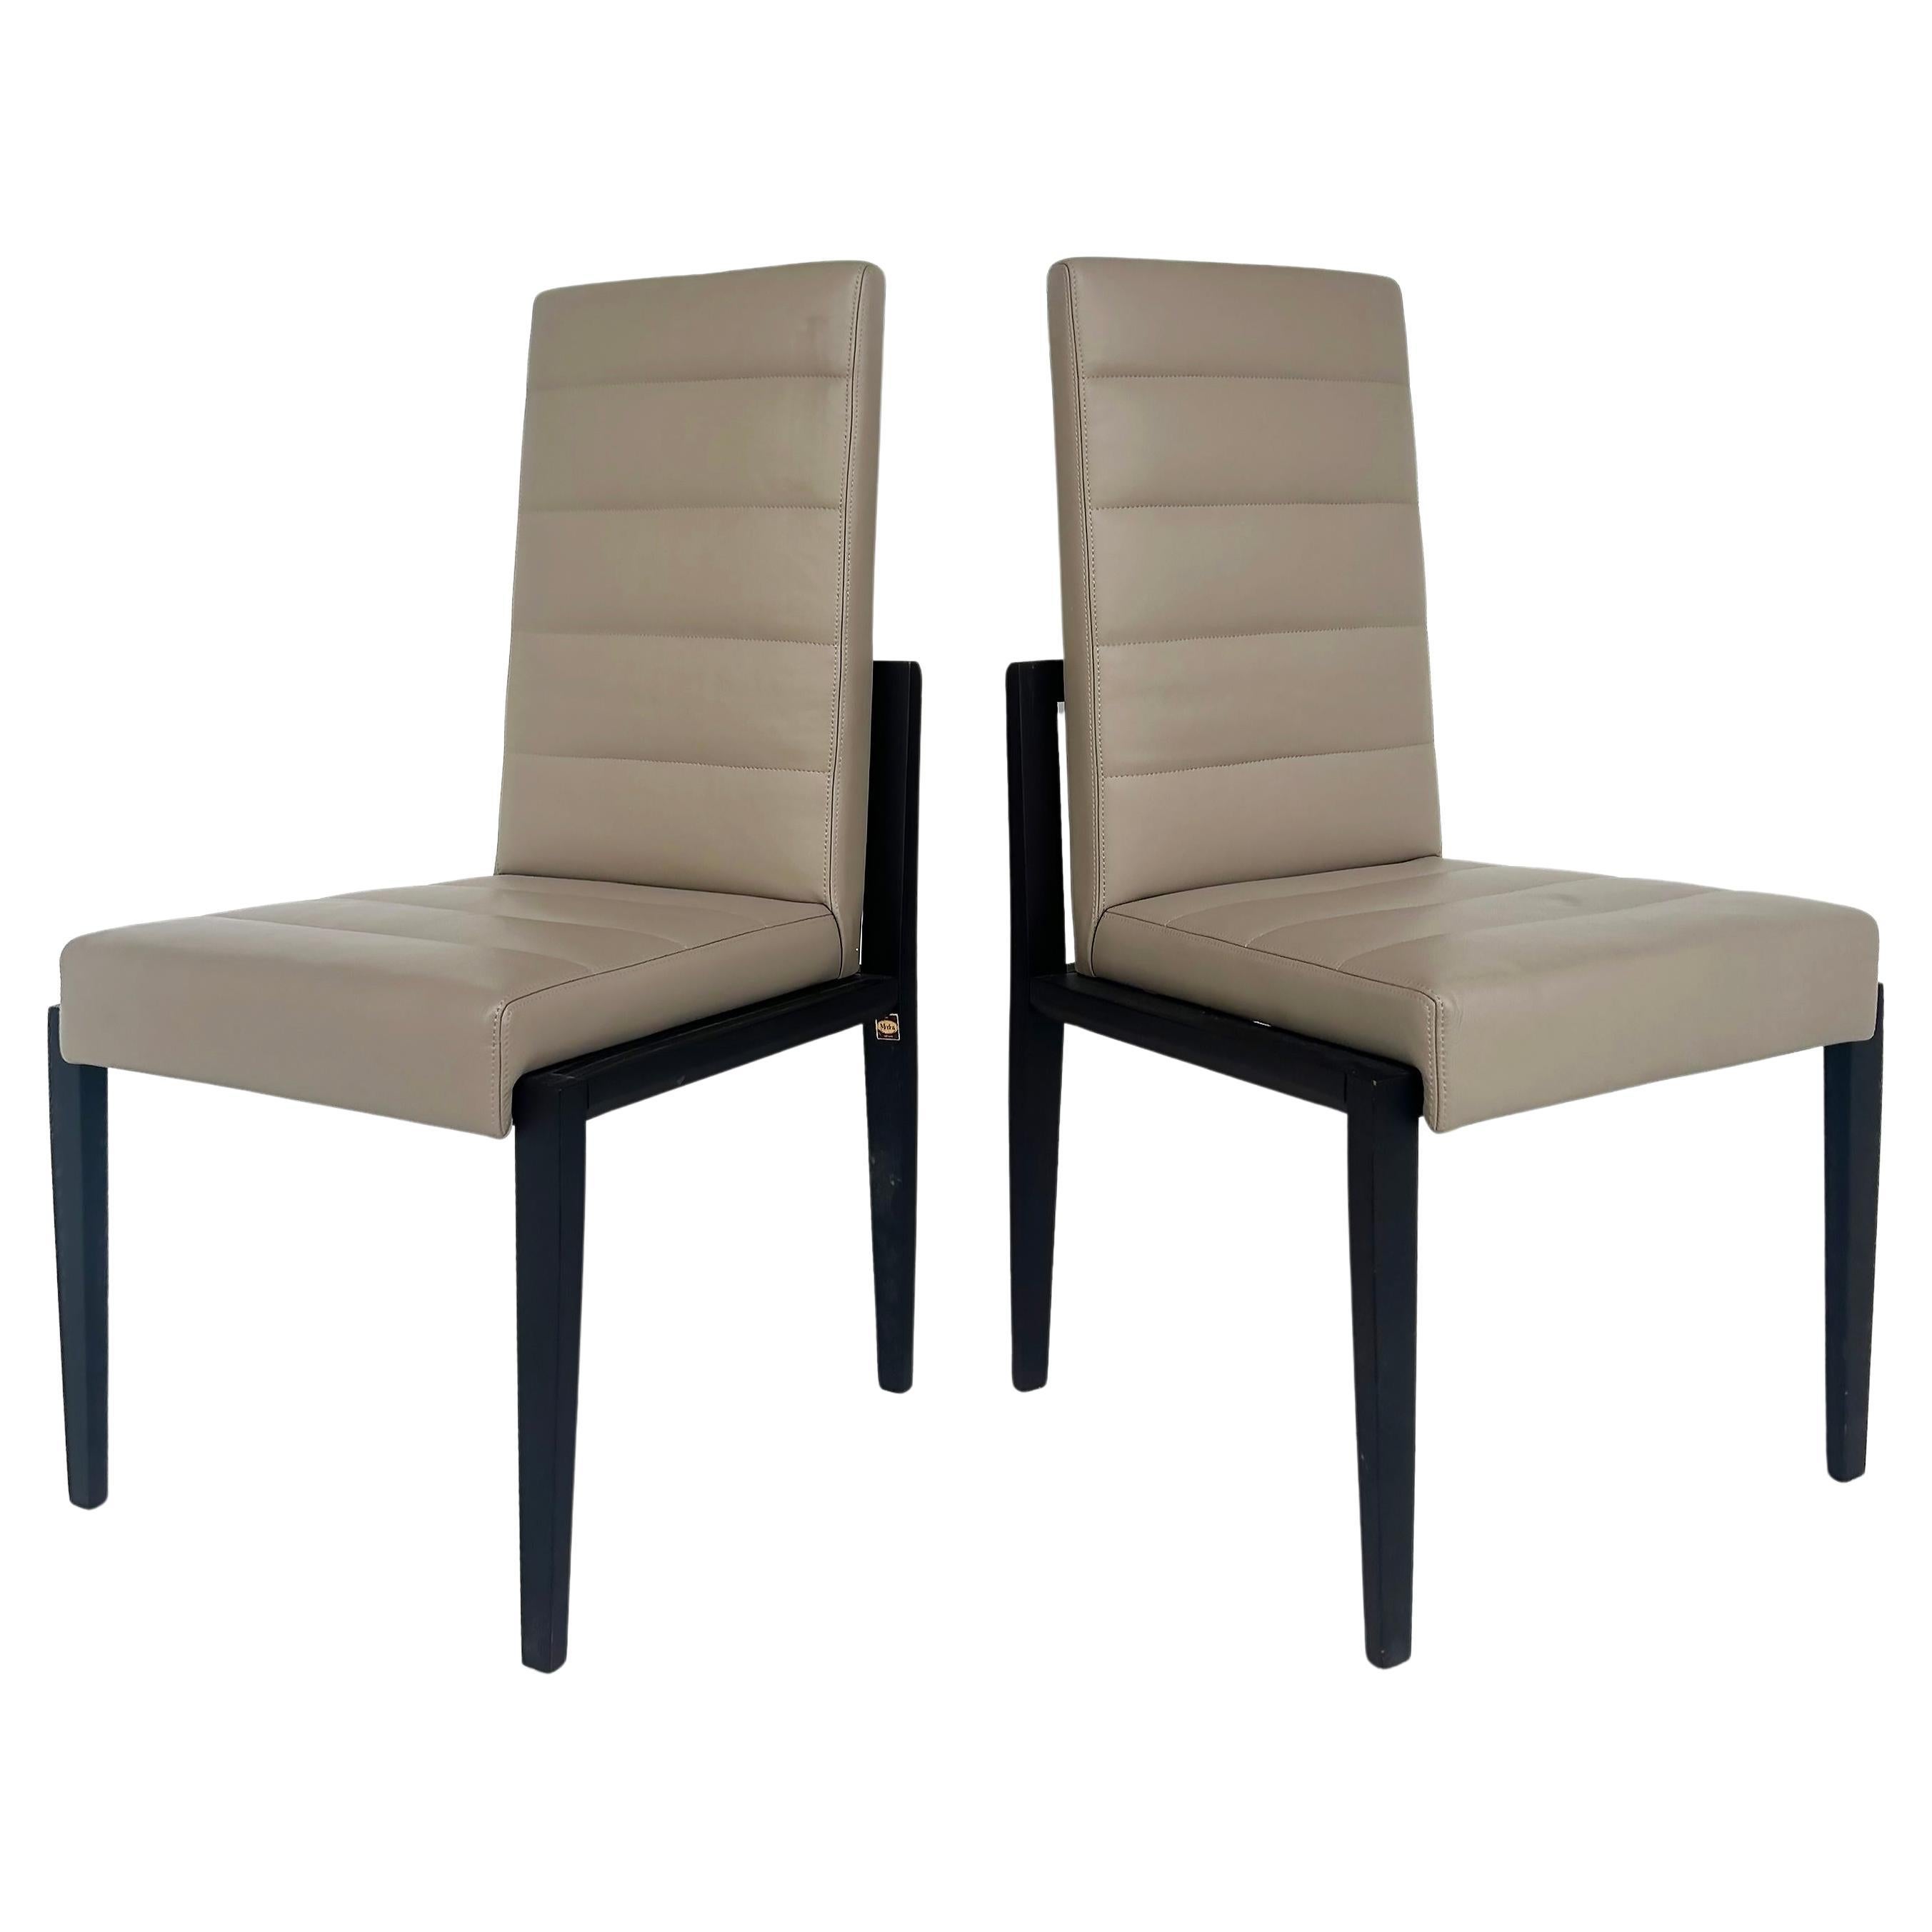 Umberto Asnago for Mobilidea Italian Leather/Oak Tall Chairs, Pair  